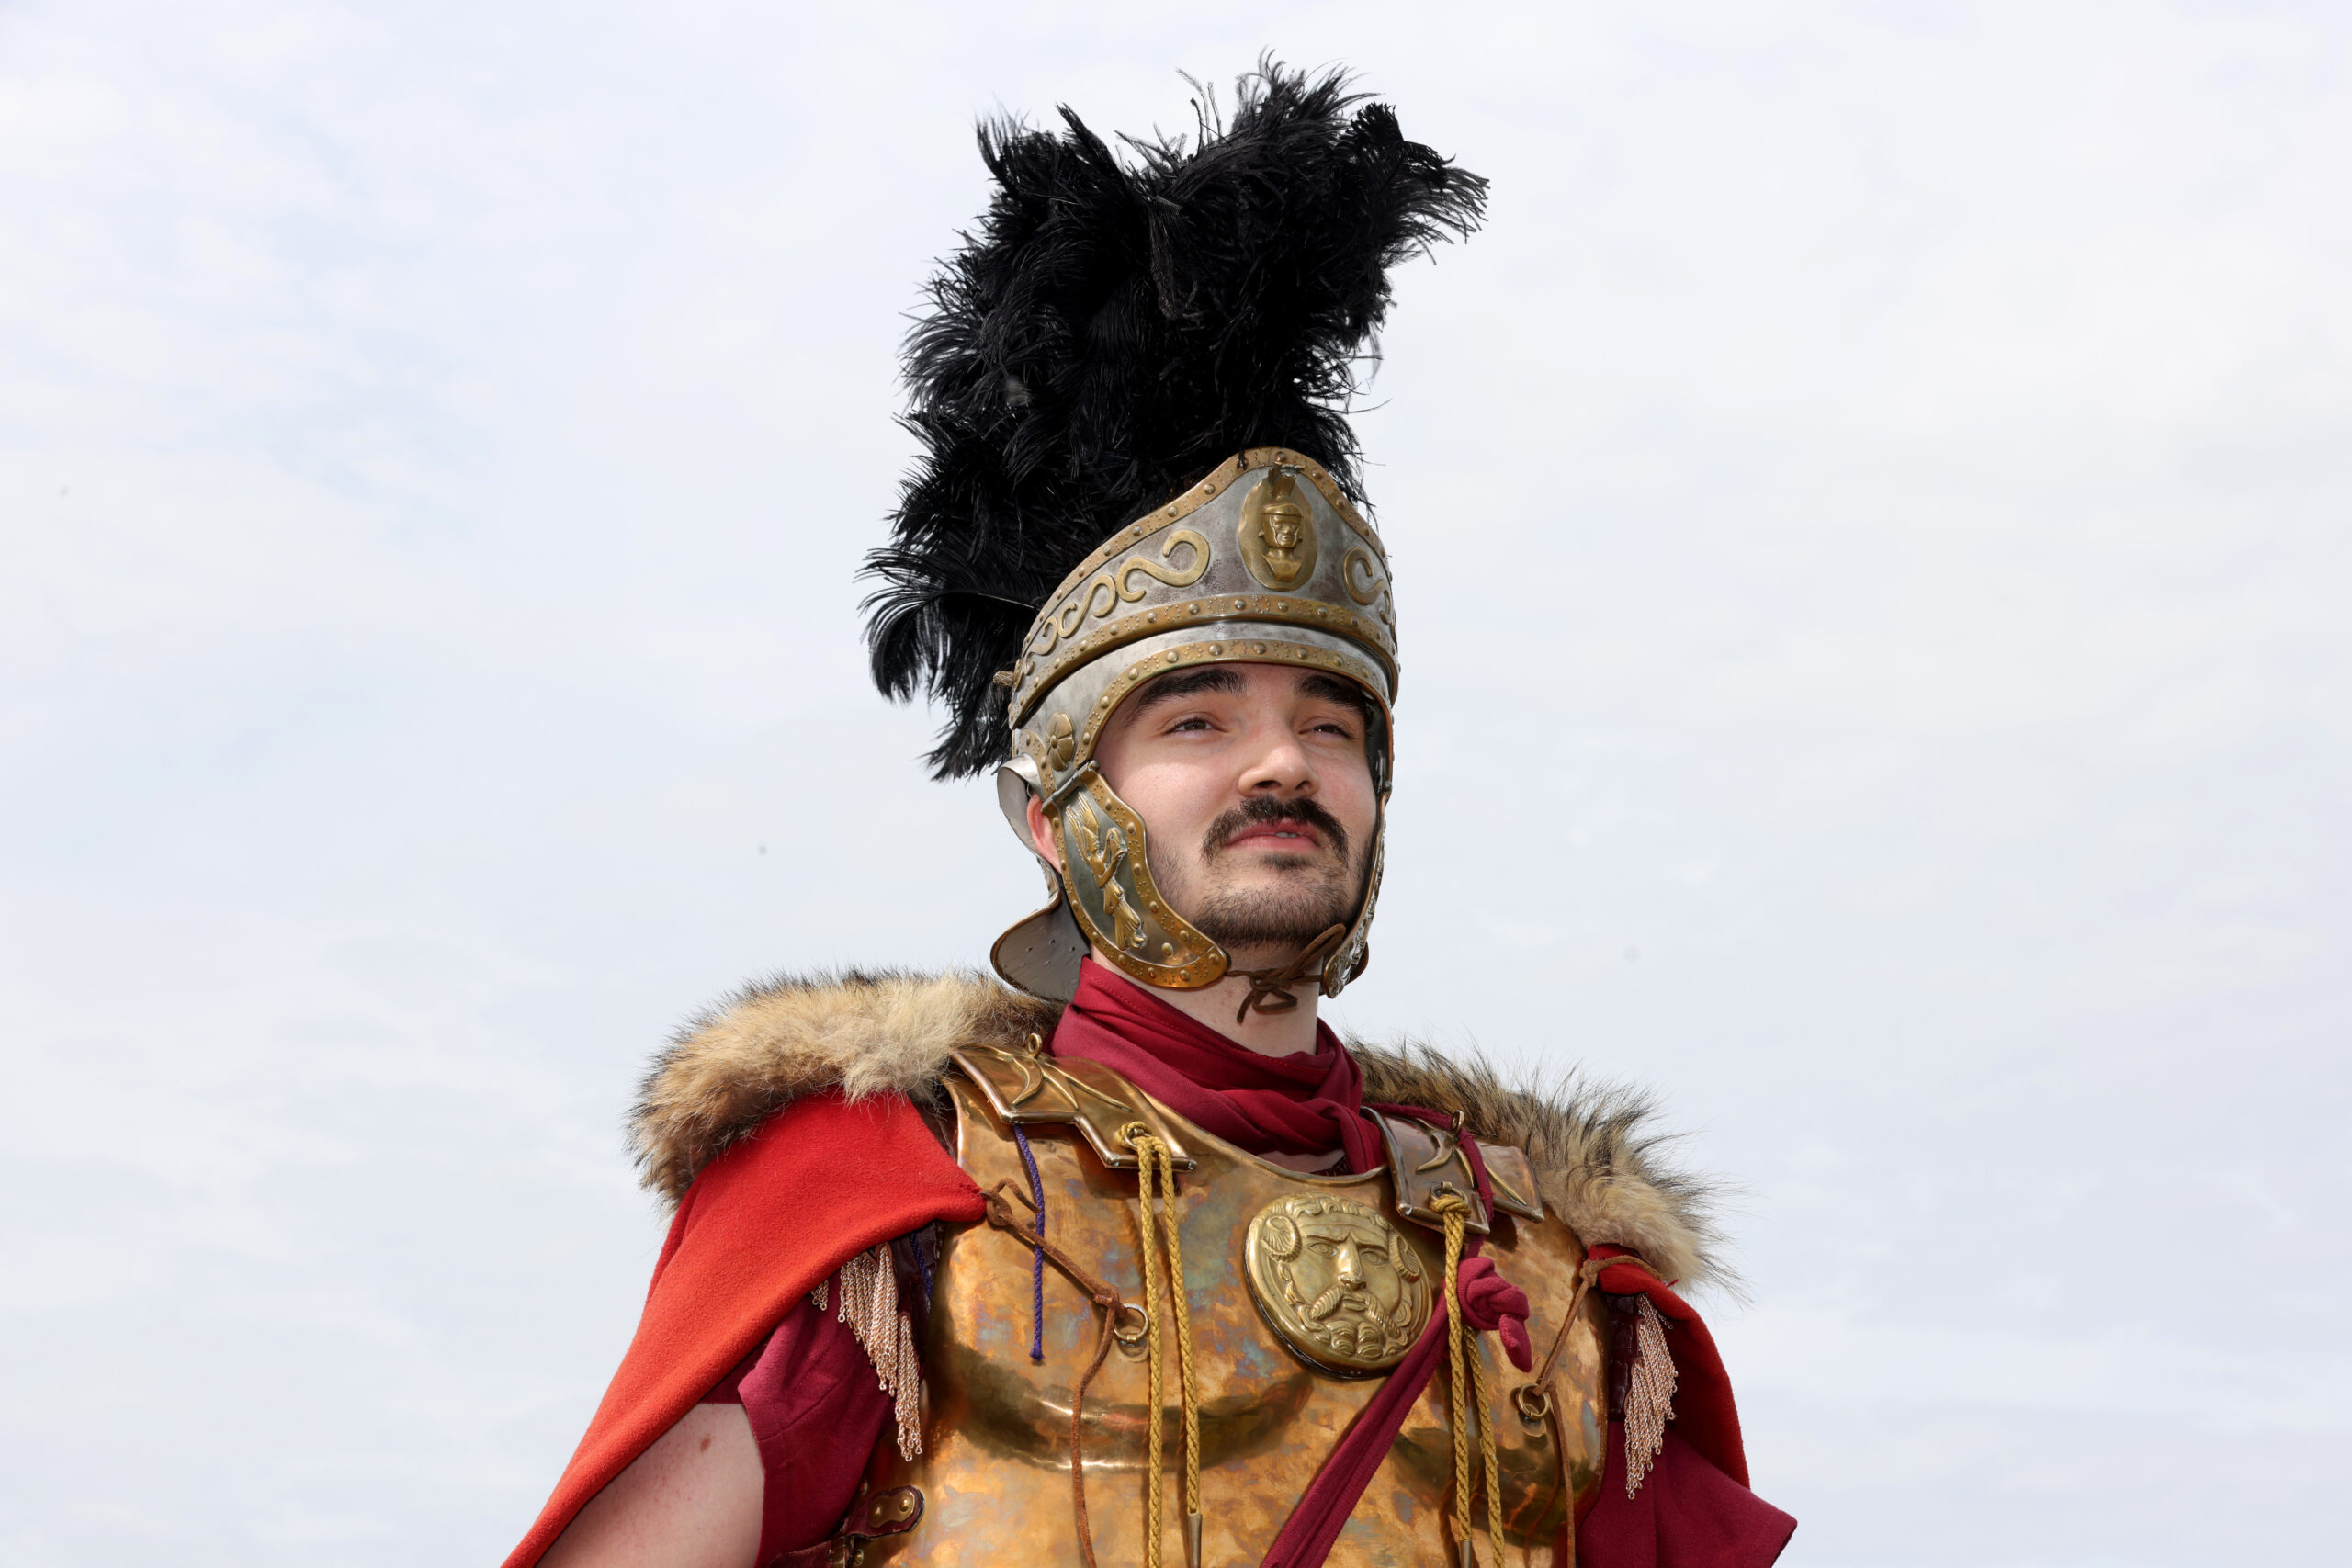 Join the Roman Army during October half term at Fishbourne